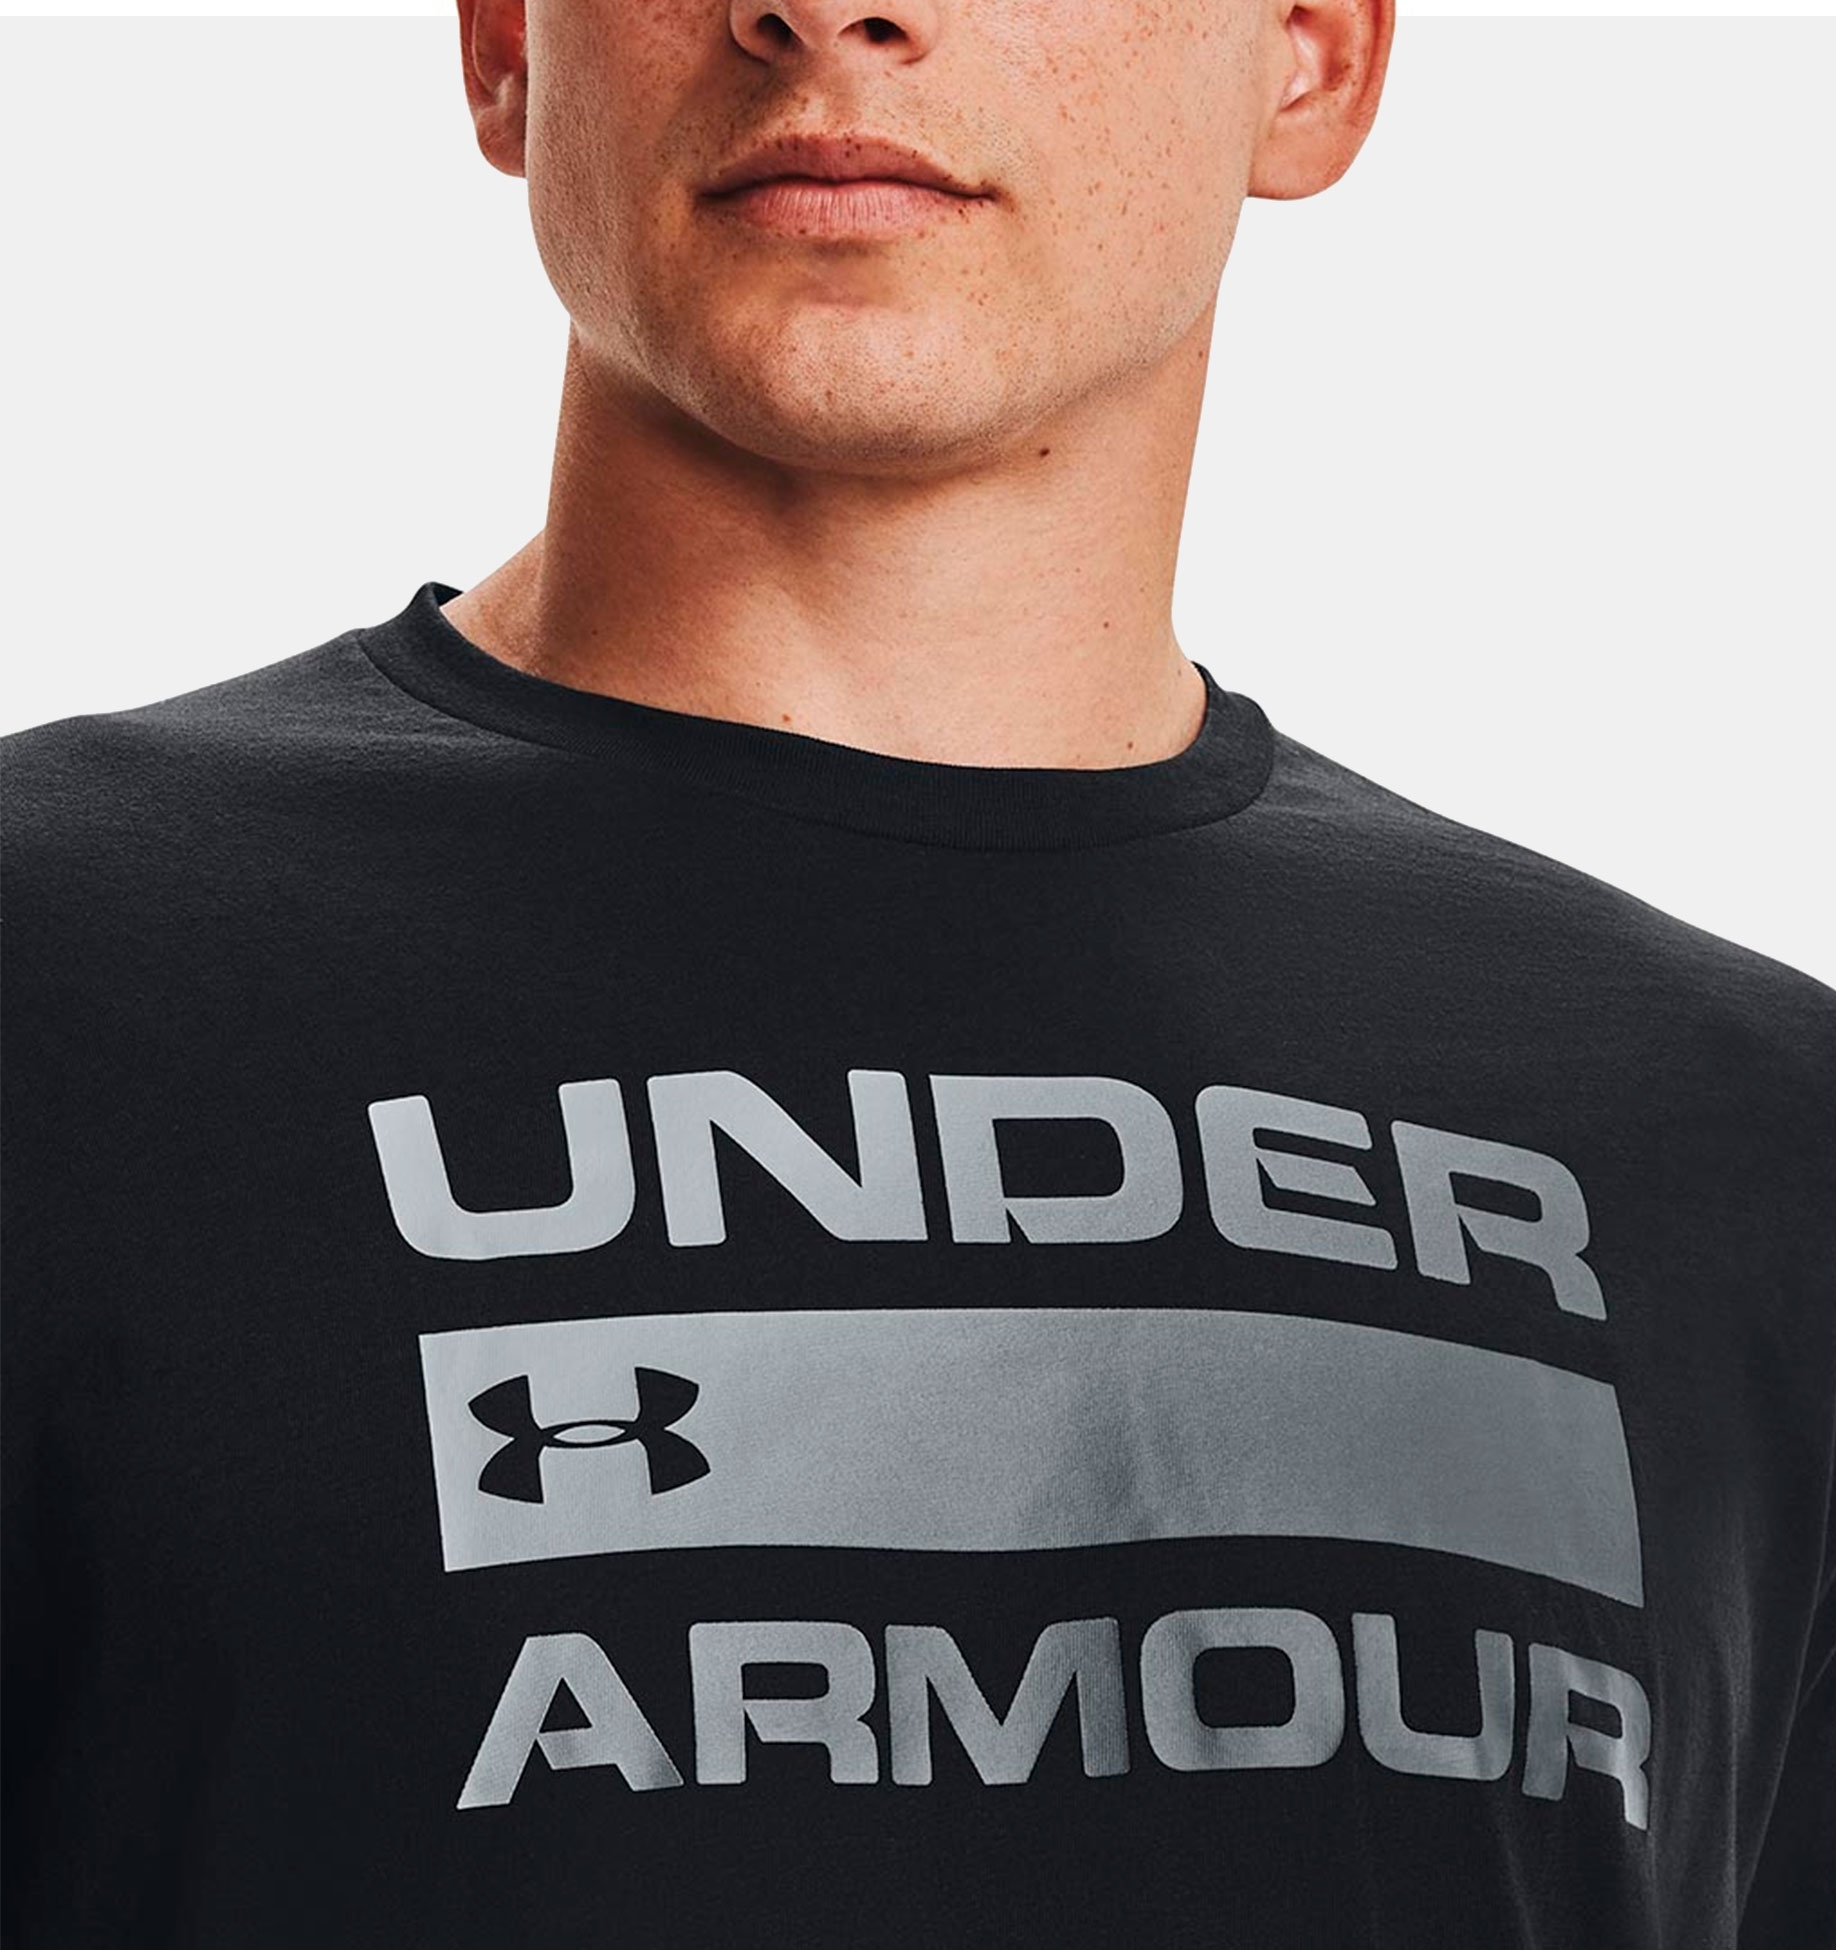 Remera Under Armour Hombre Team Issue - S/C — Menpi